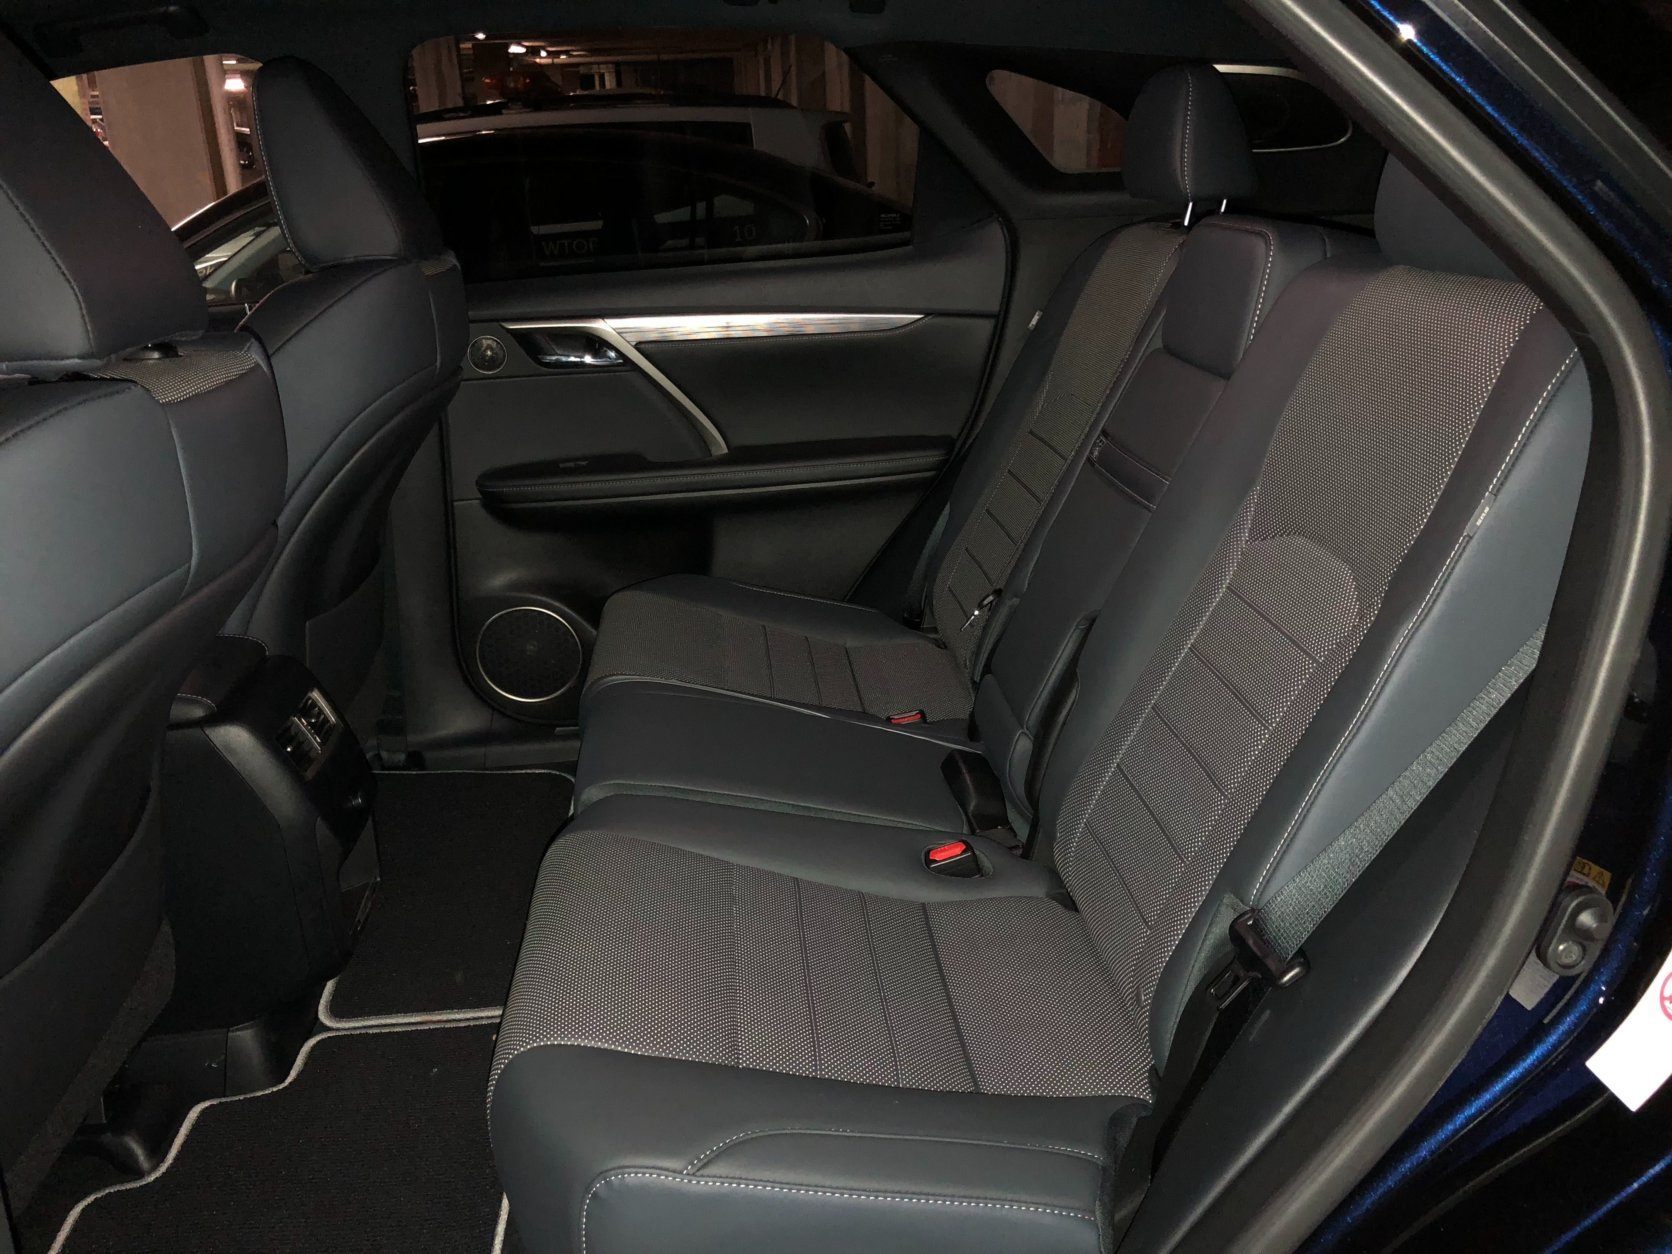 The F Sport sports a business like interior. With large 12.3” screen.